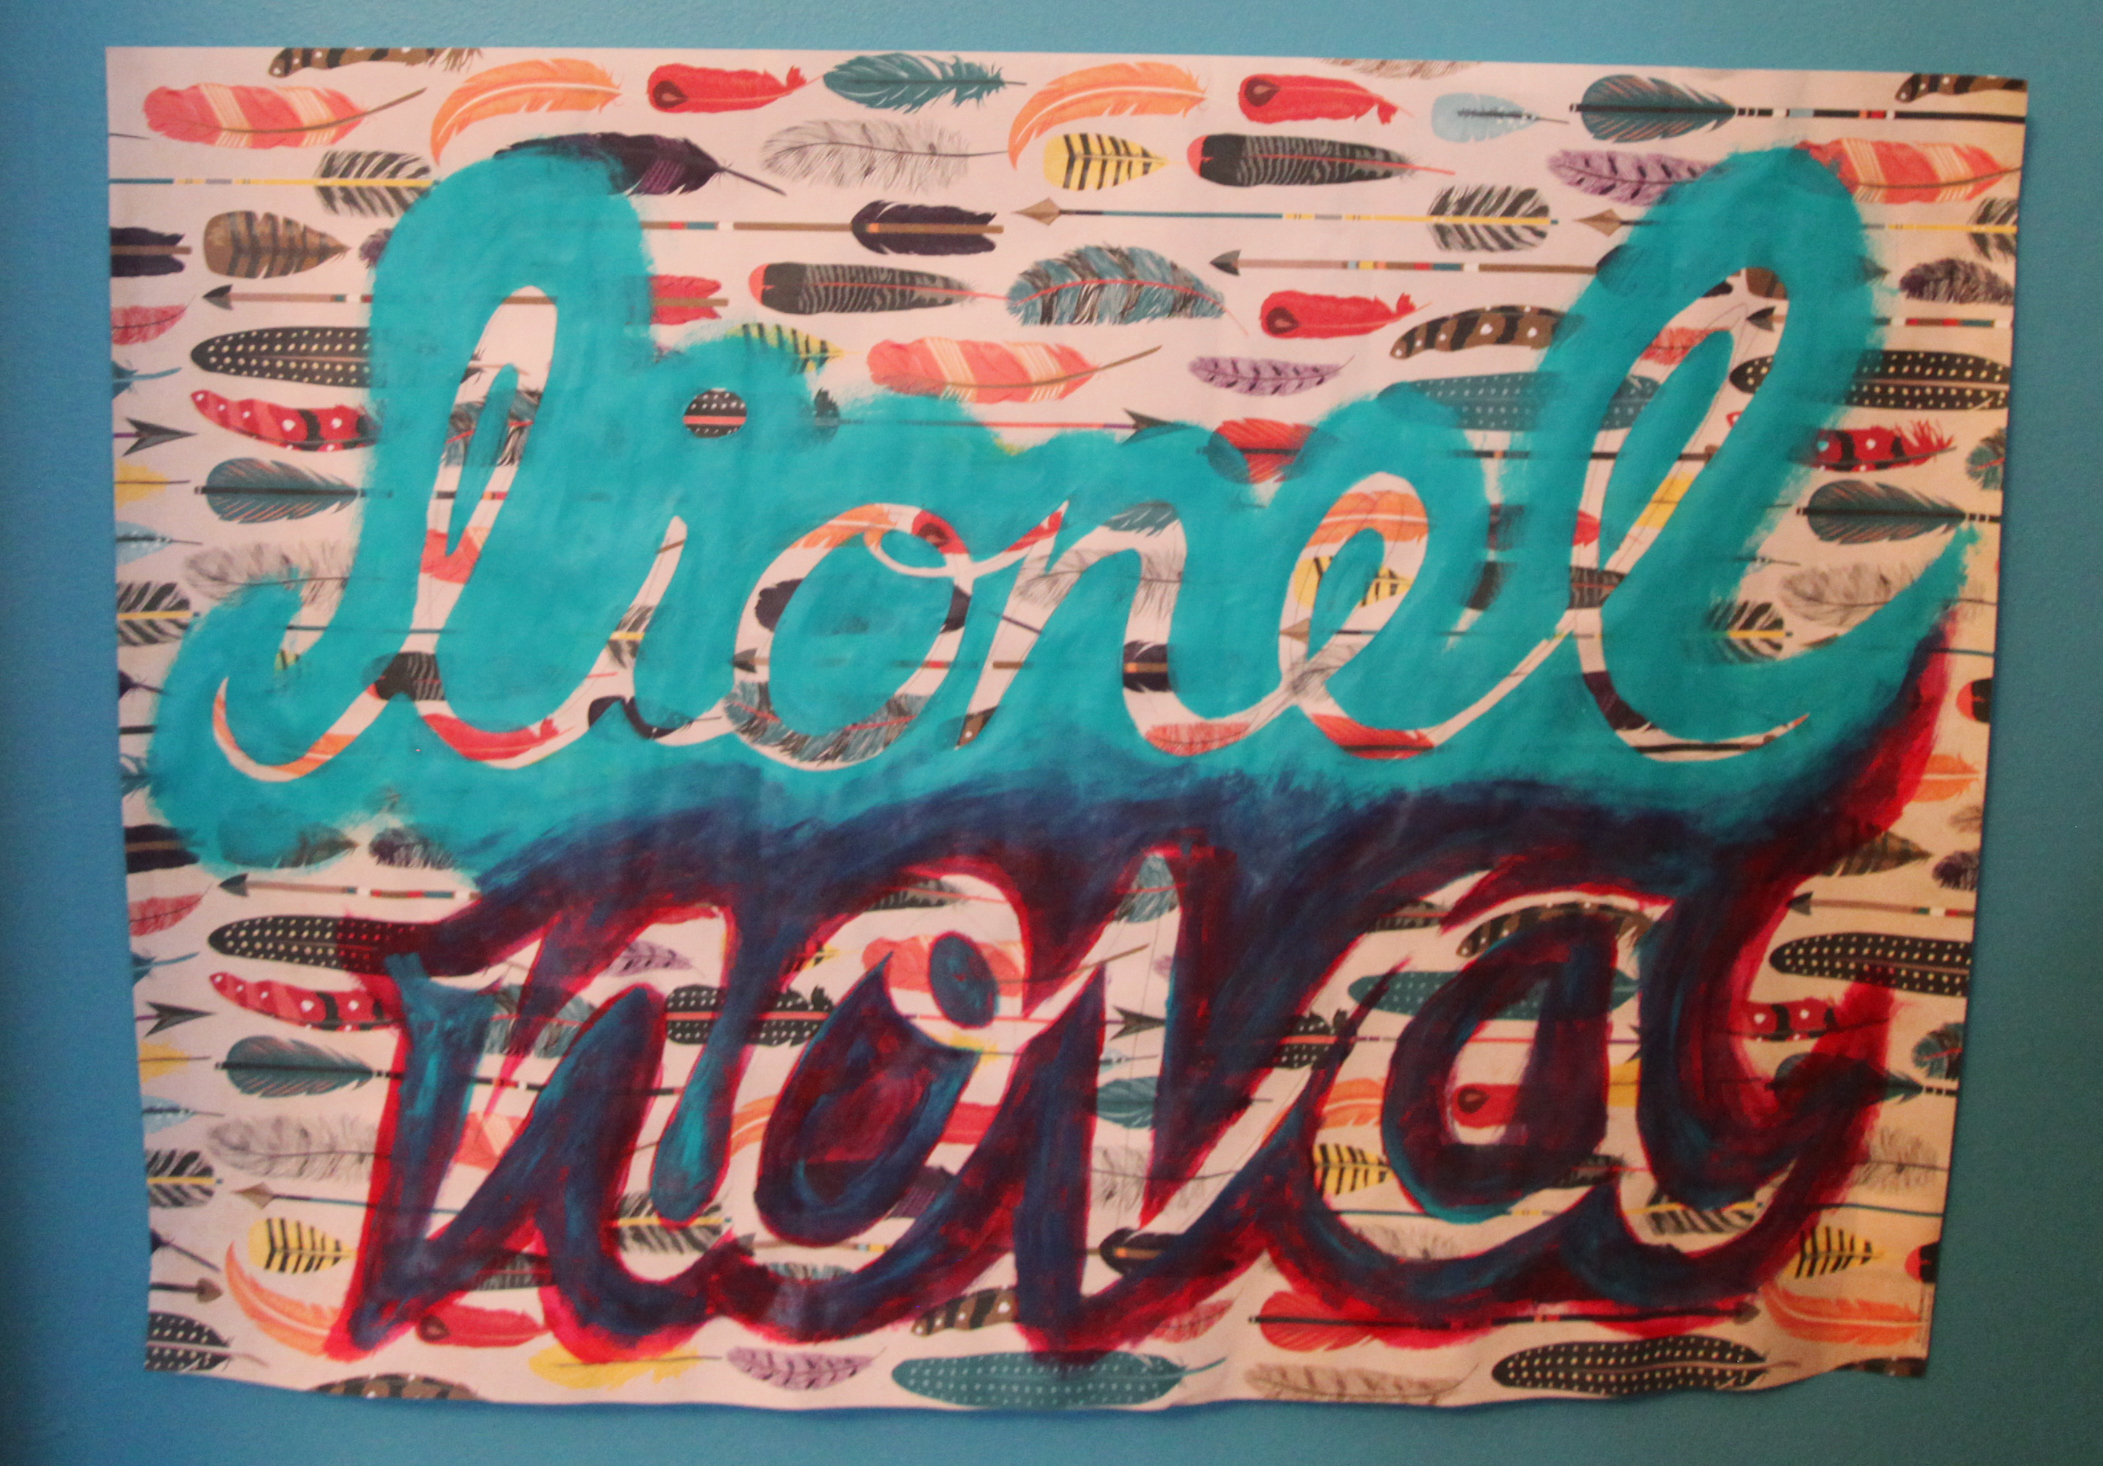  Benny painted the scripted "Lionel Nova" sign on wrapping paper.&nbsp; 